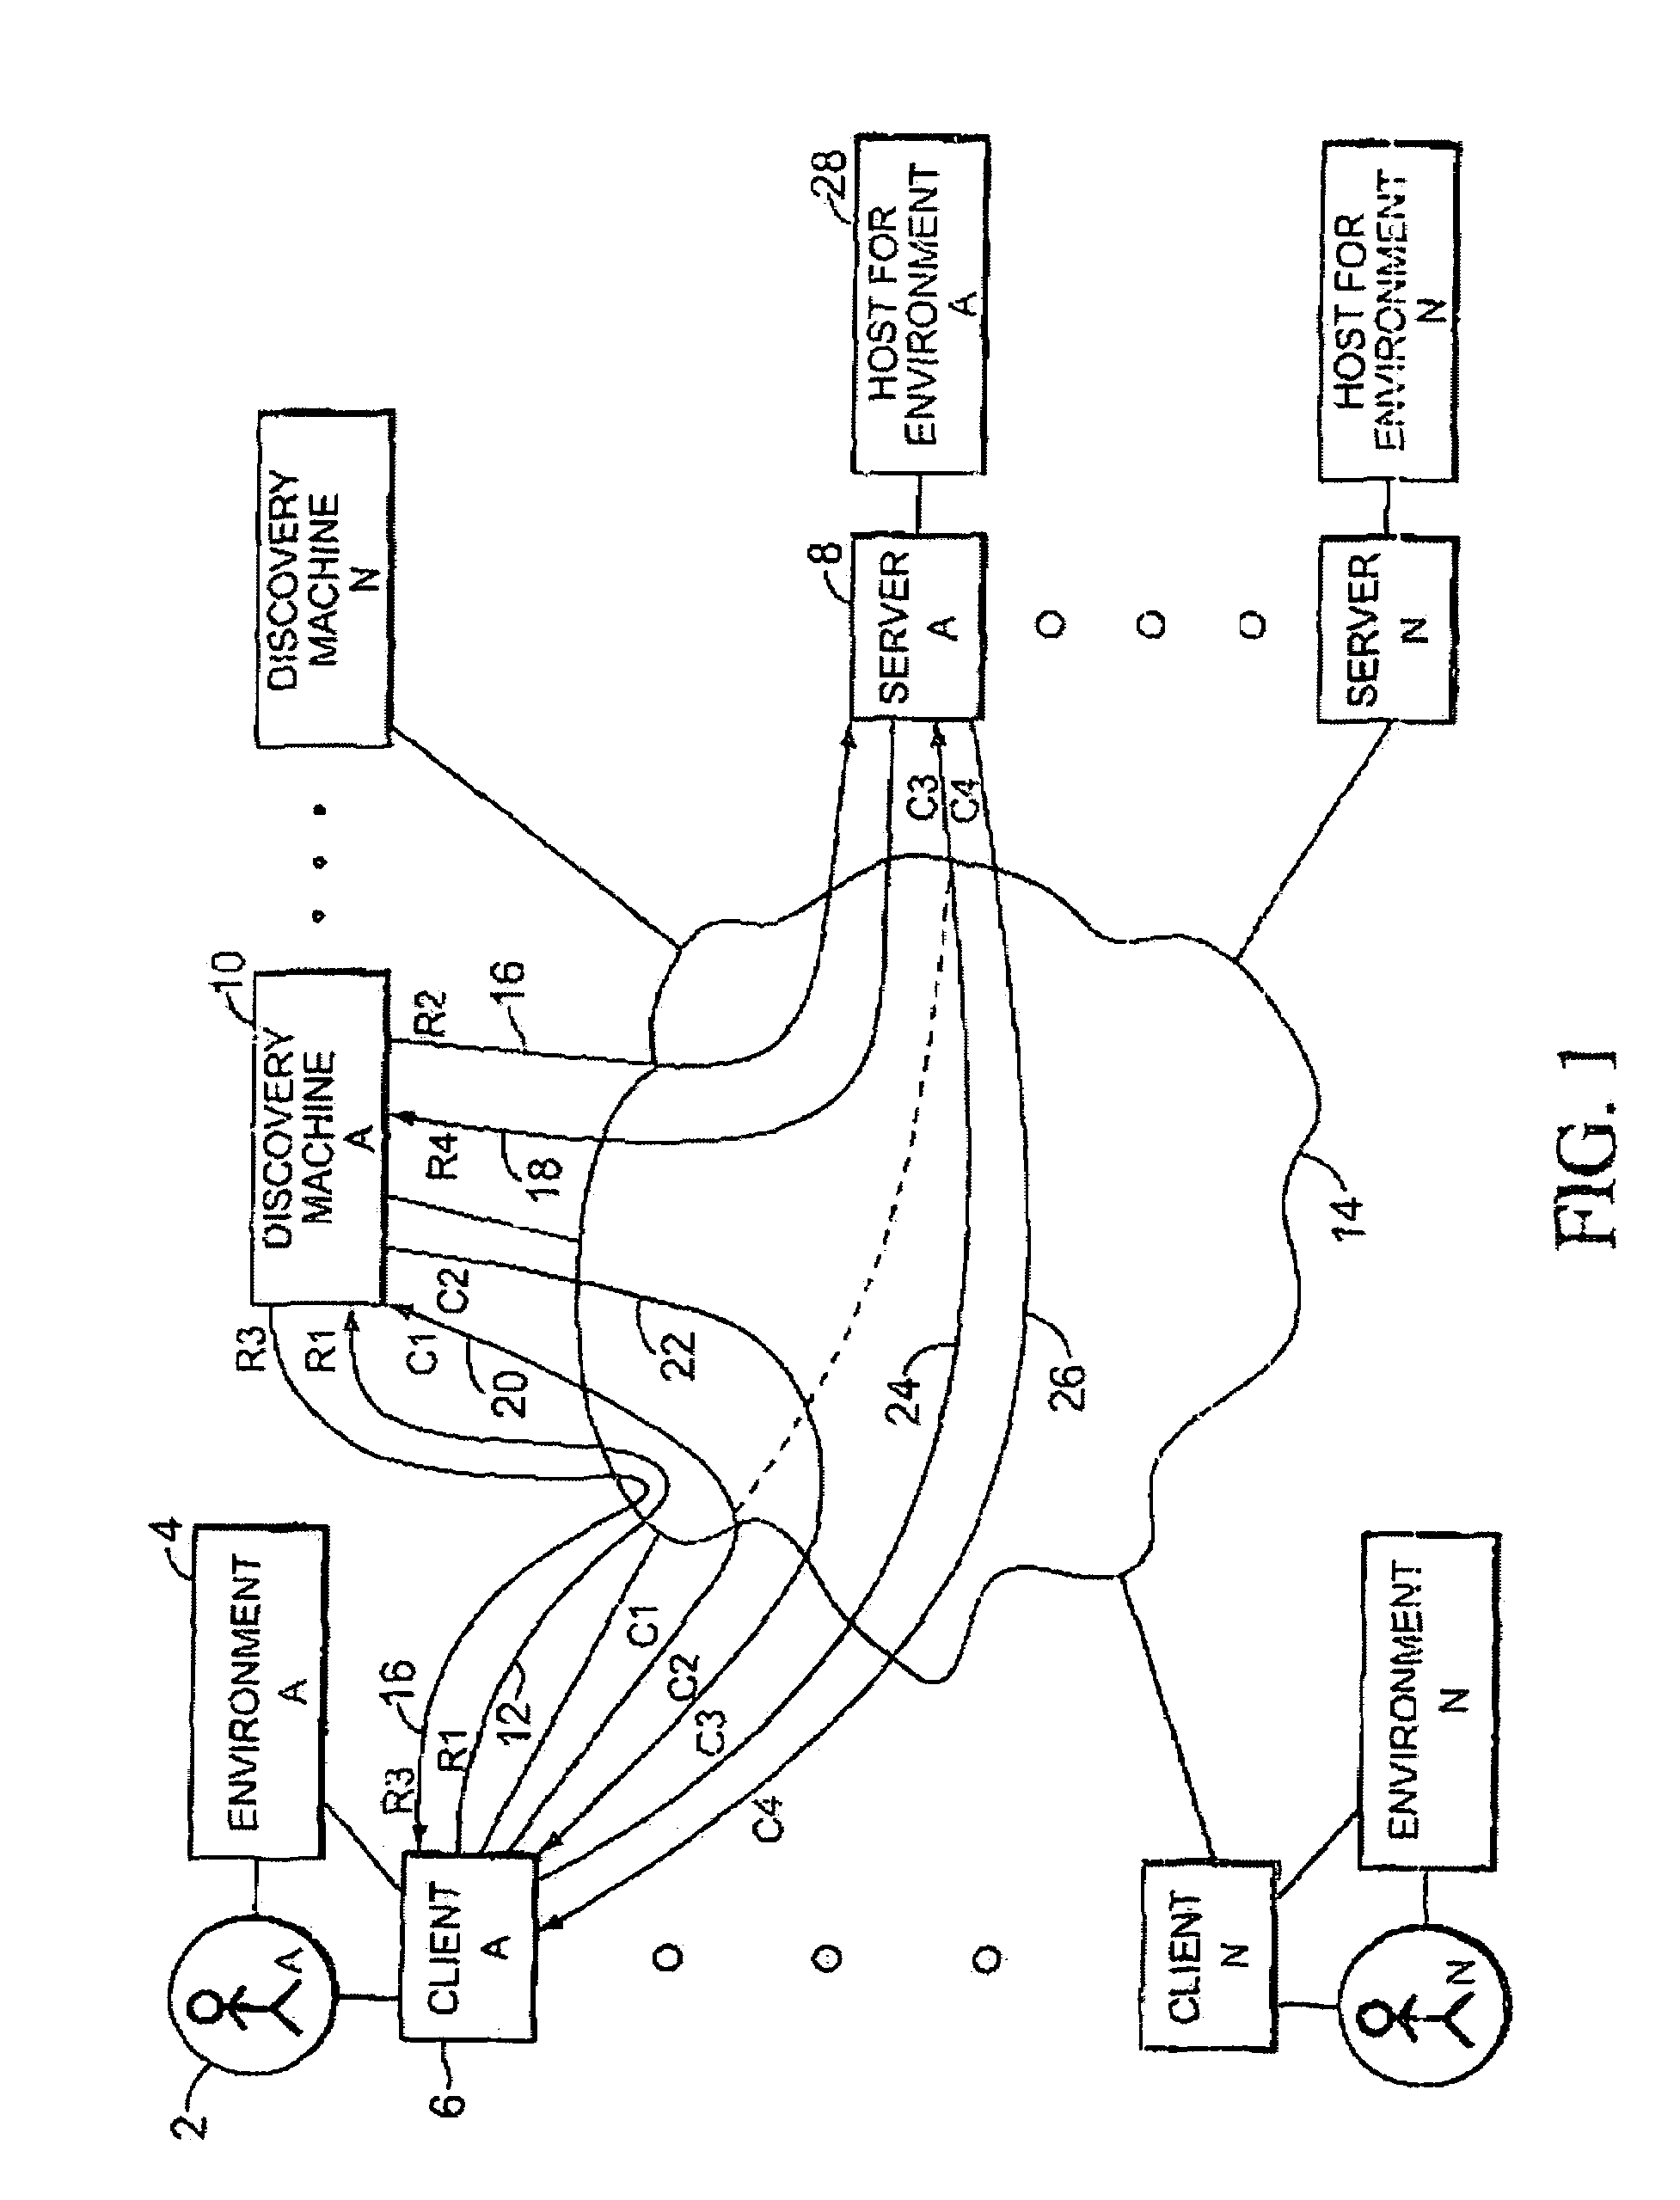 Managed information transmission of electronic items in a network environment